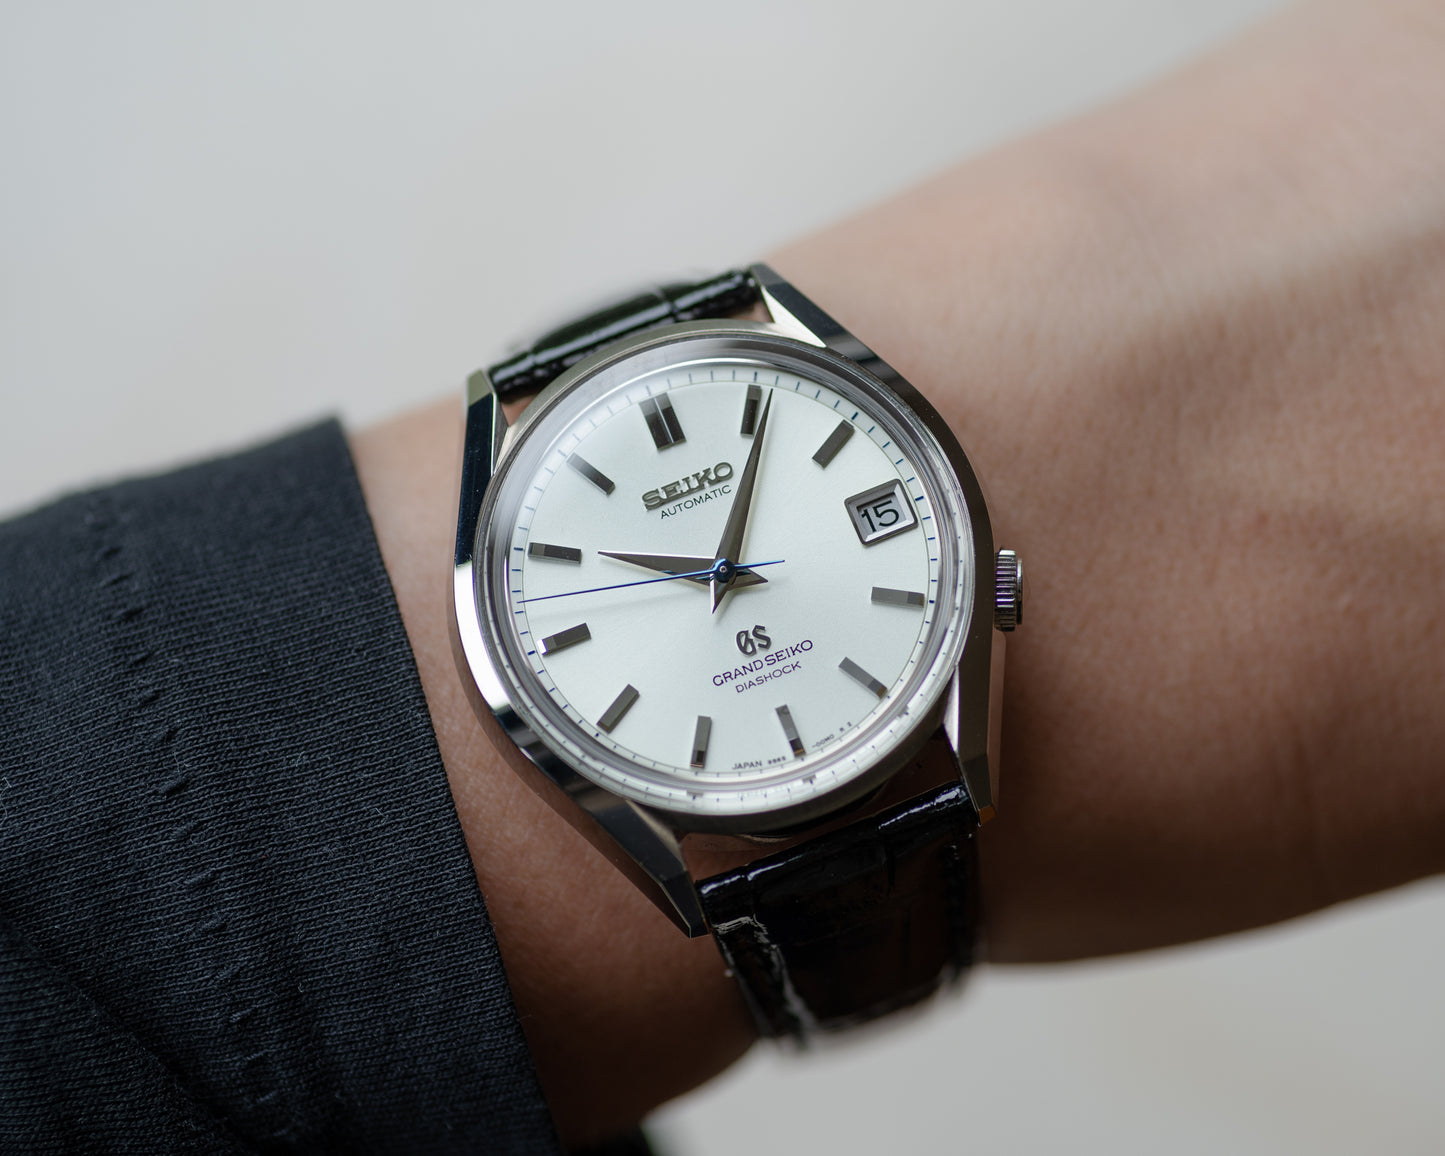 Grand Seiko SBGR091 in white gold - 62 GS reissue limited edition